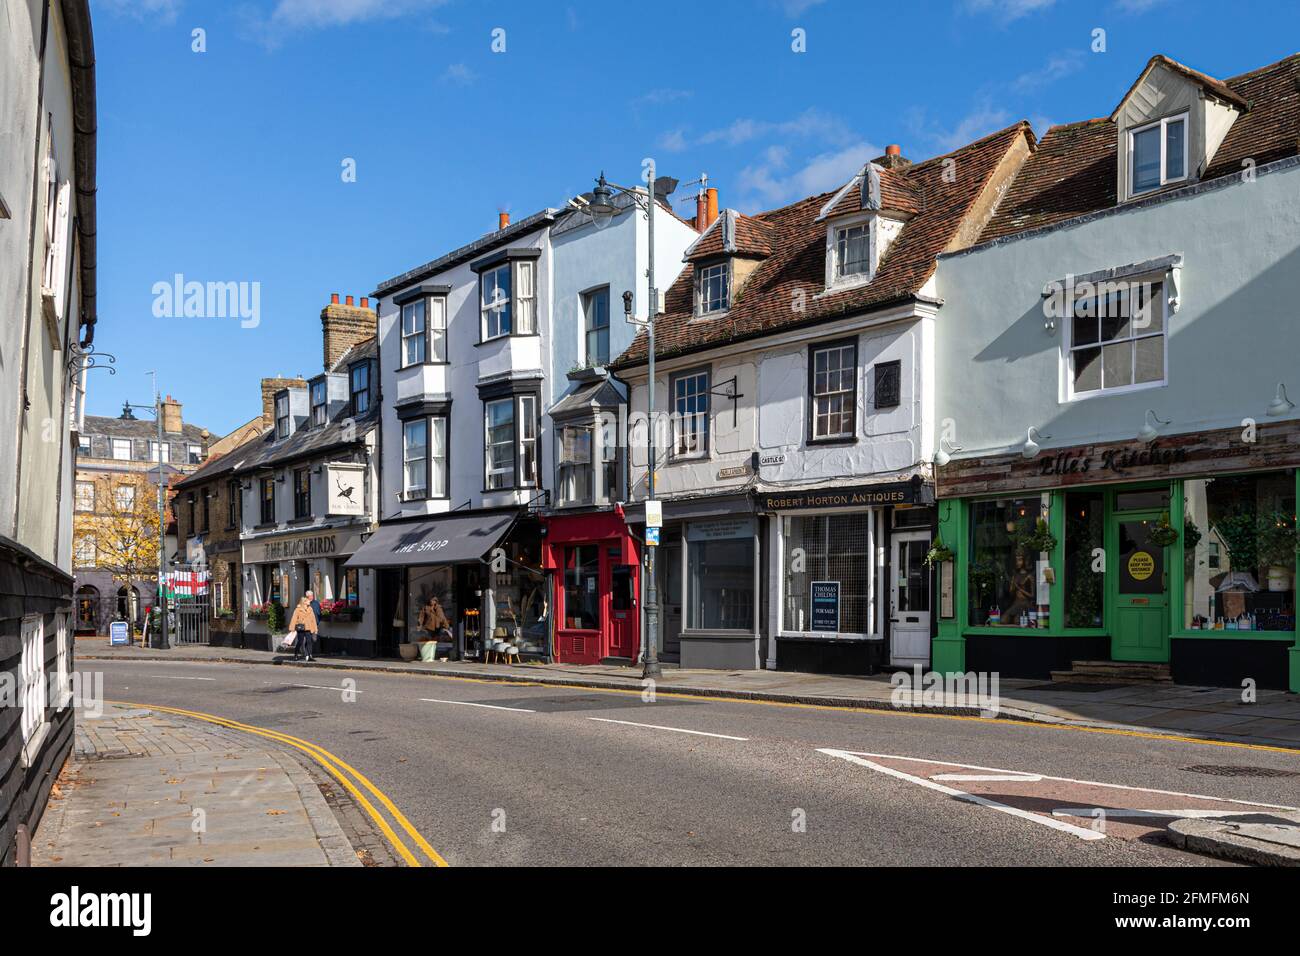 Town centre shops and buildings, Hertford, Hertfordshire, England Stock Photo